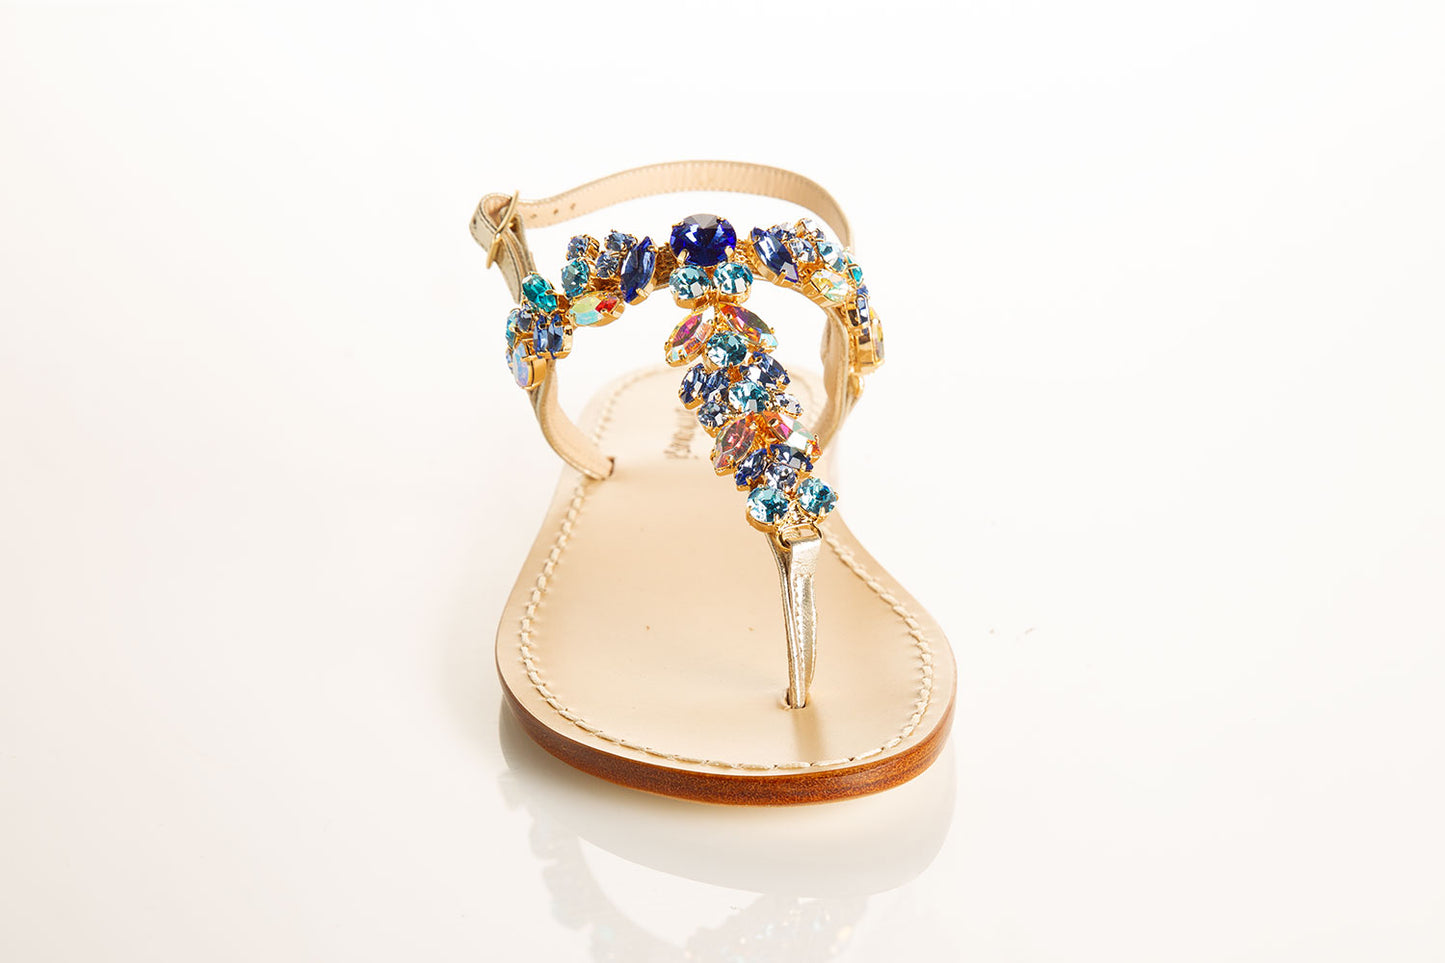 flat sandals with aqua Swarovski crystals, luxury sandals with crystal embellishment, Tuscan leather sandals, stylish thong strap sandals, comfortable flat sandals